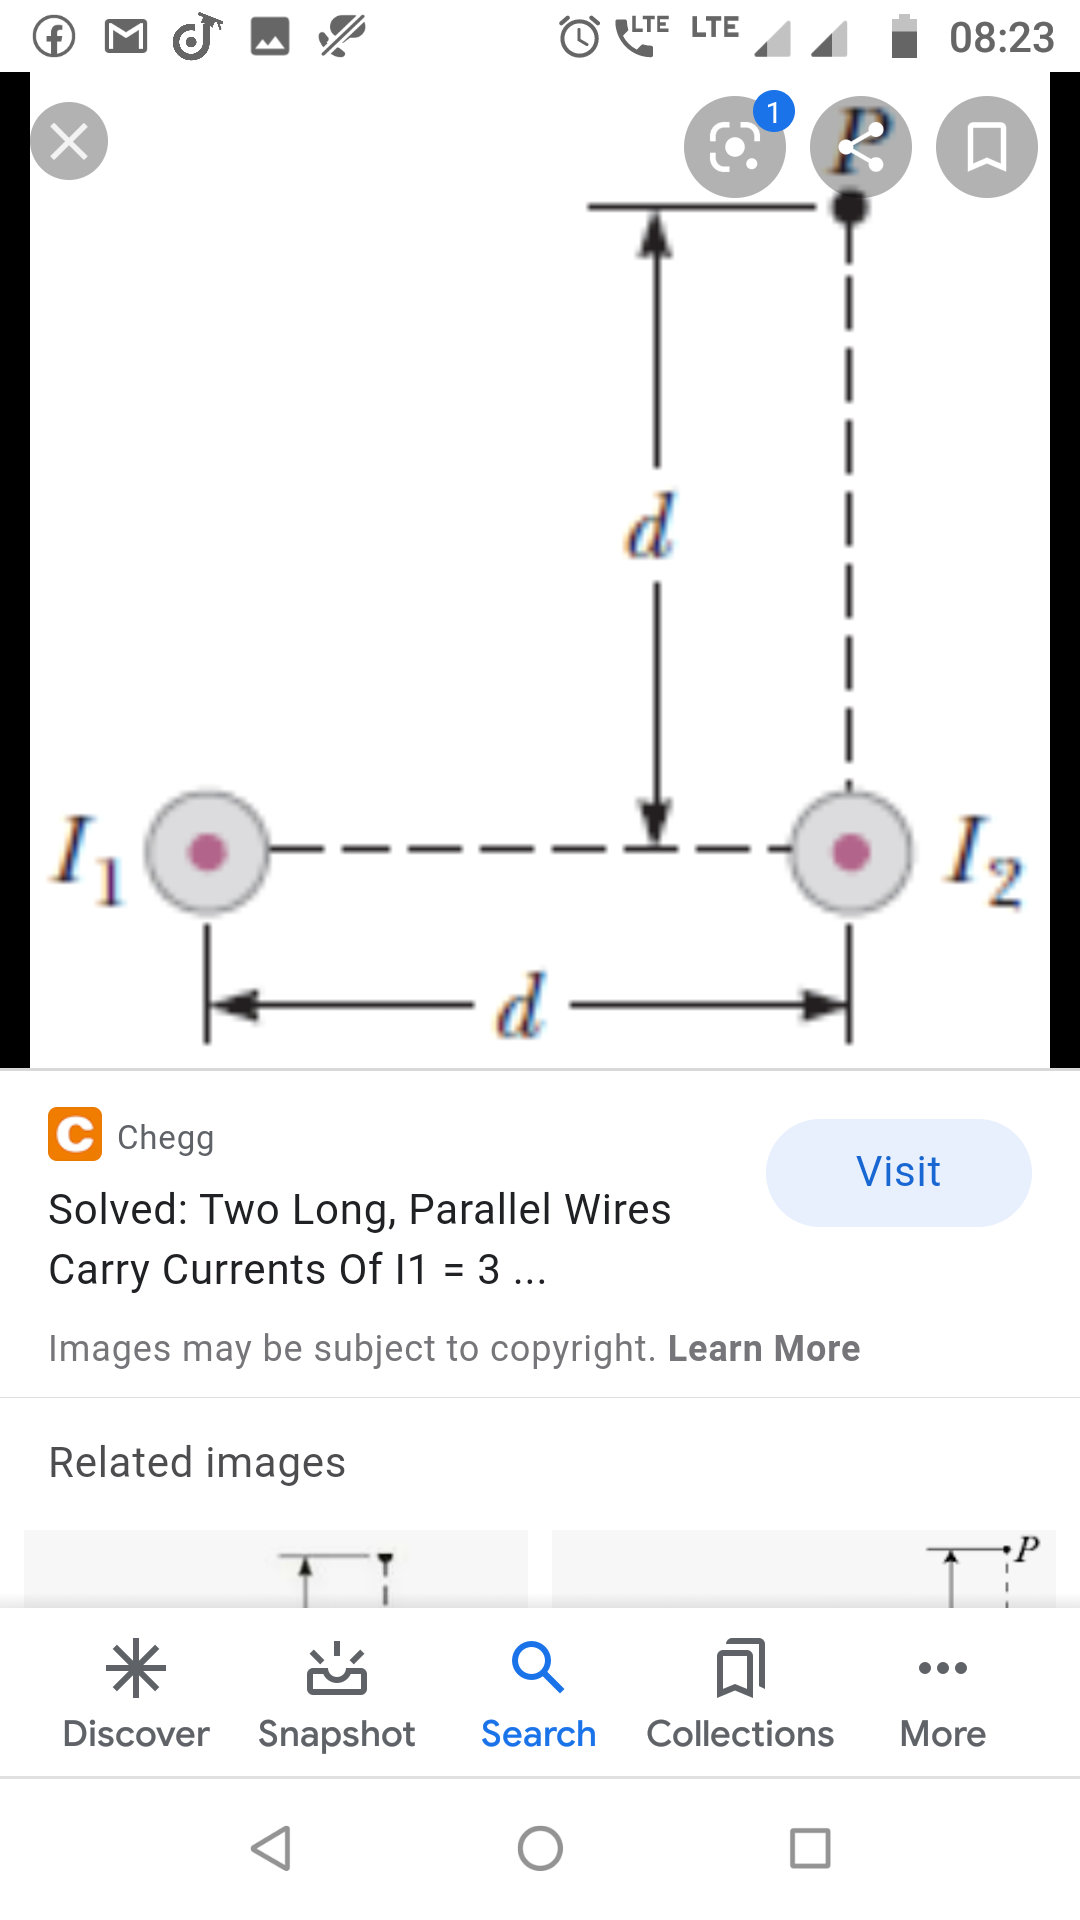 LTE LTE
08:23
d
I2
C Chegg
Visit
Solved: Two Long, Parallel Wires
Carry Currents Of 1 = 3 ...
%3D
Images may be subject to copyright. Learn More
Related images
•P
Discover Snapshot
Search
Collections
More
